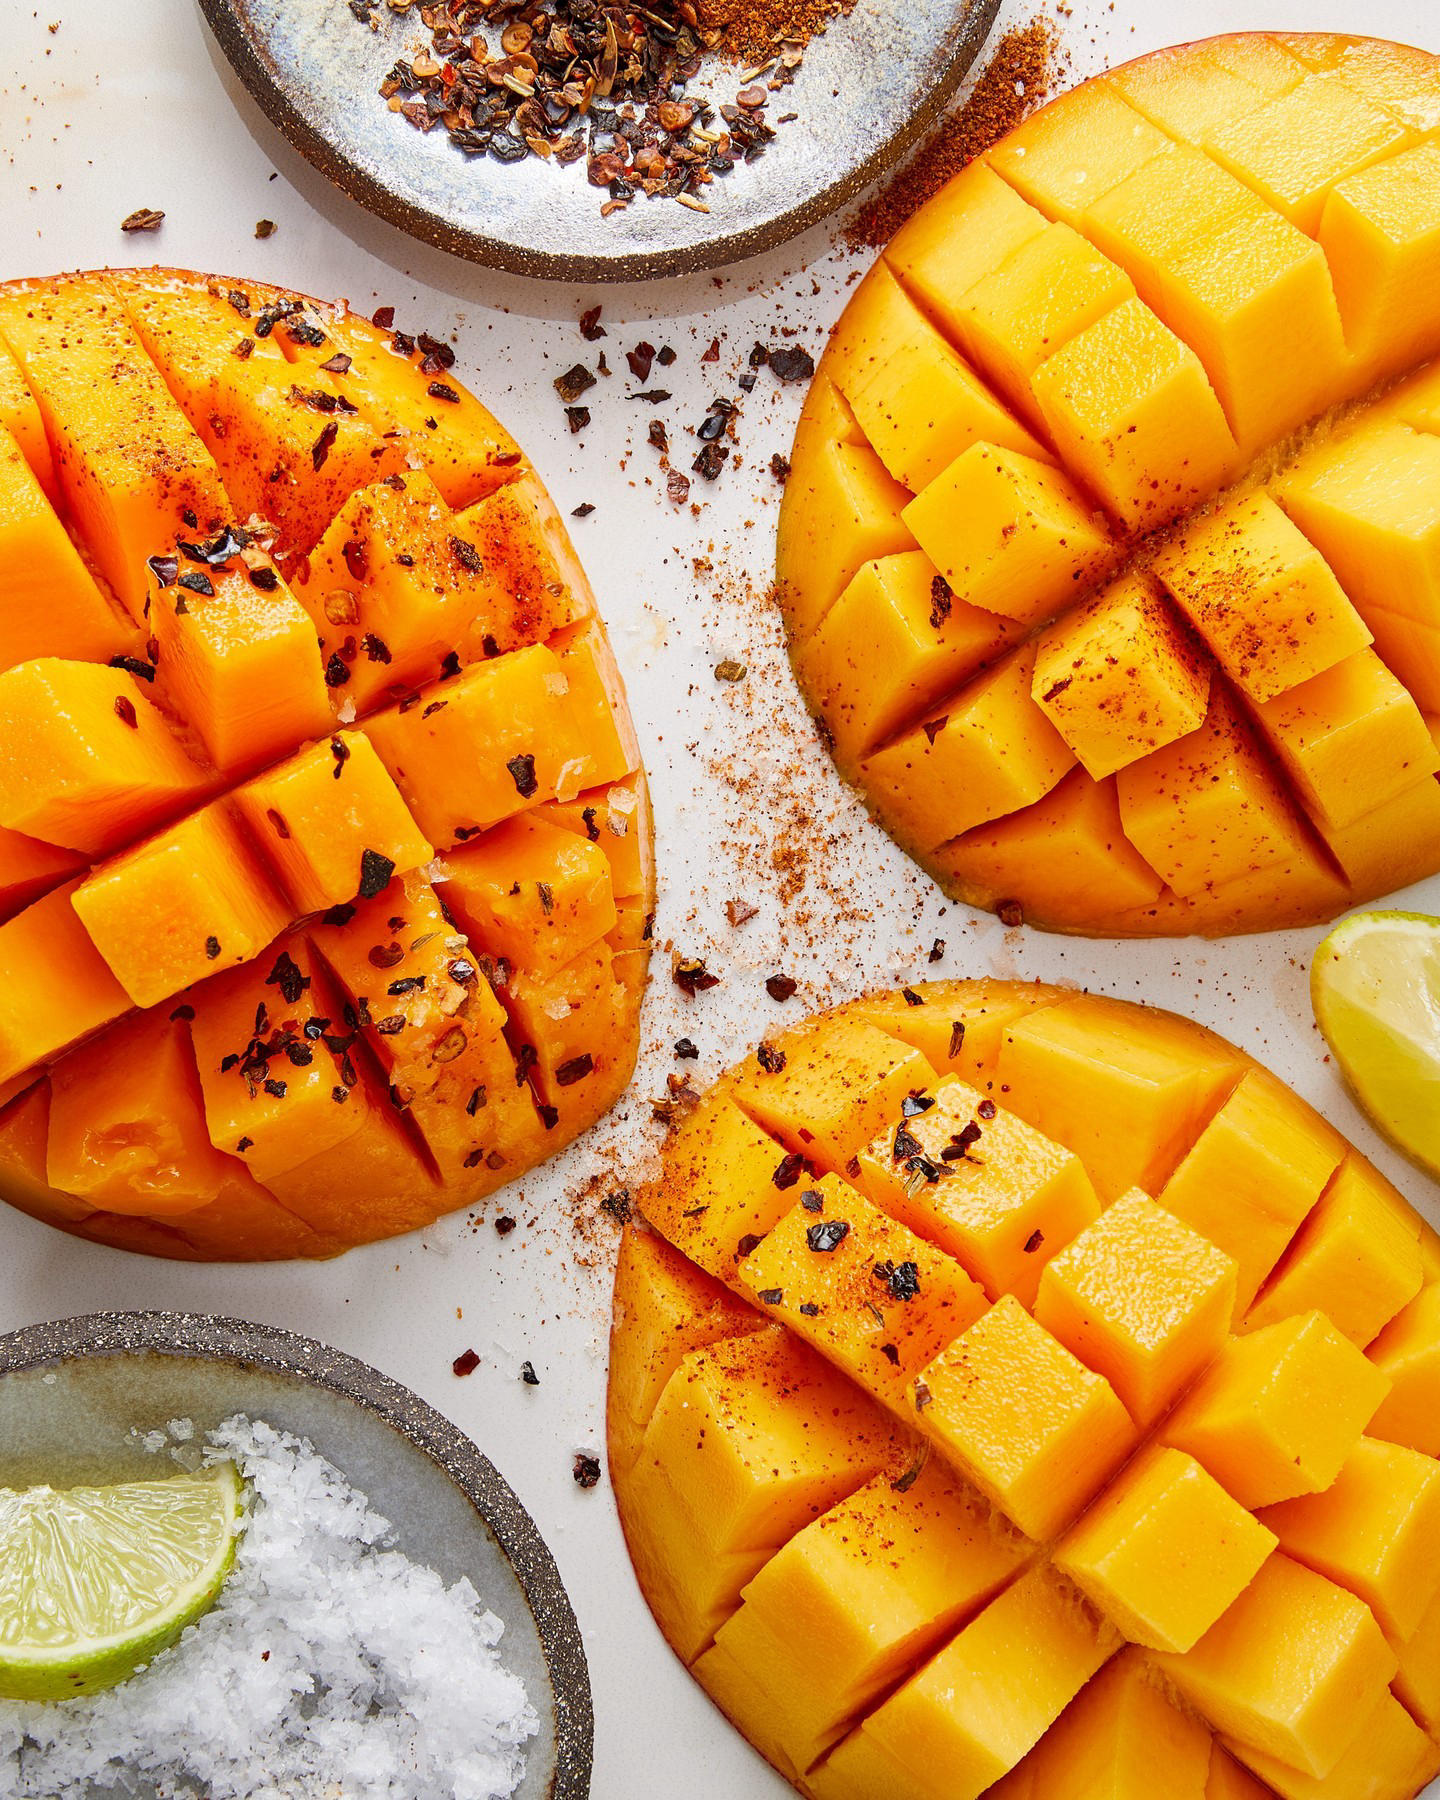 Harrods Food - Our gloriously juicy mangoes taste all the sweeter with a sprinkle of sea salt